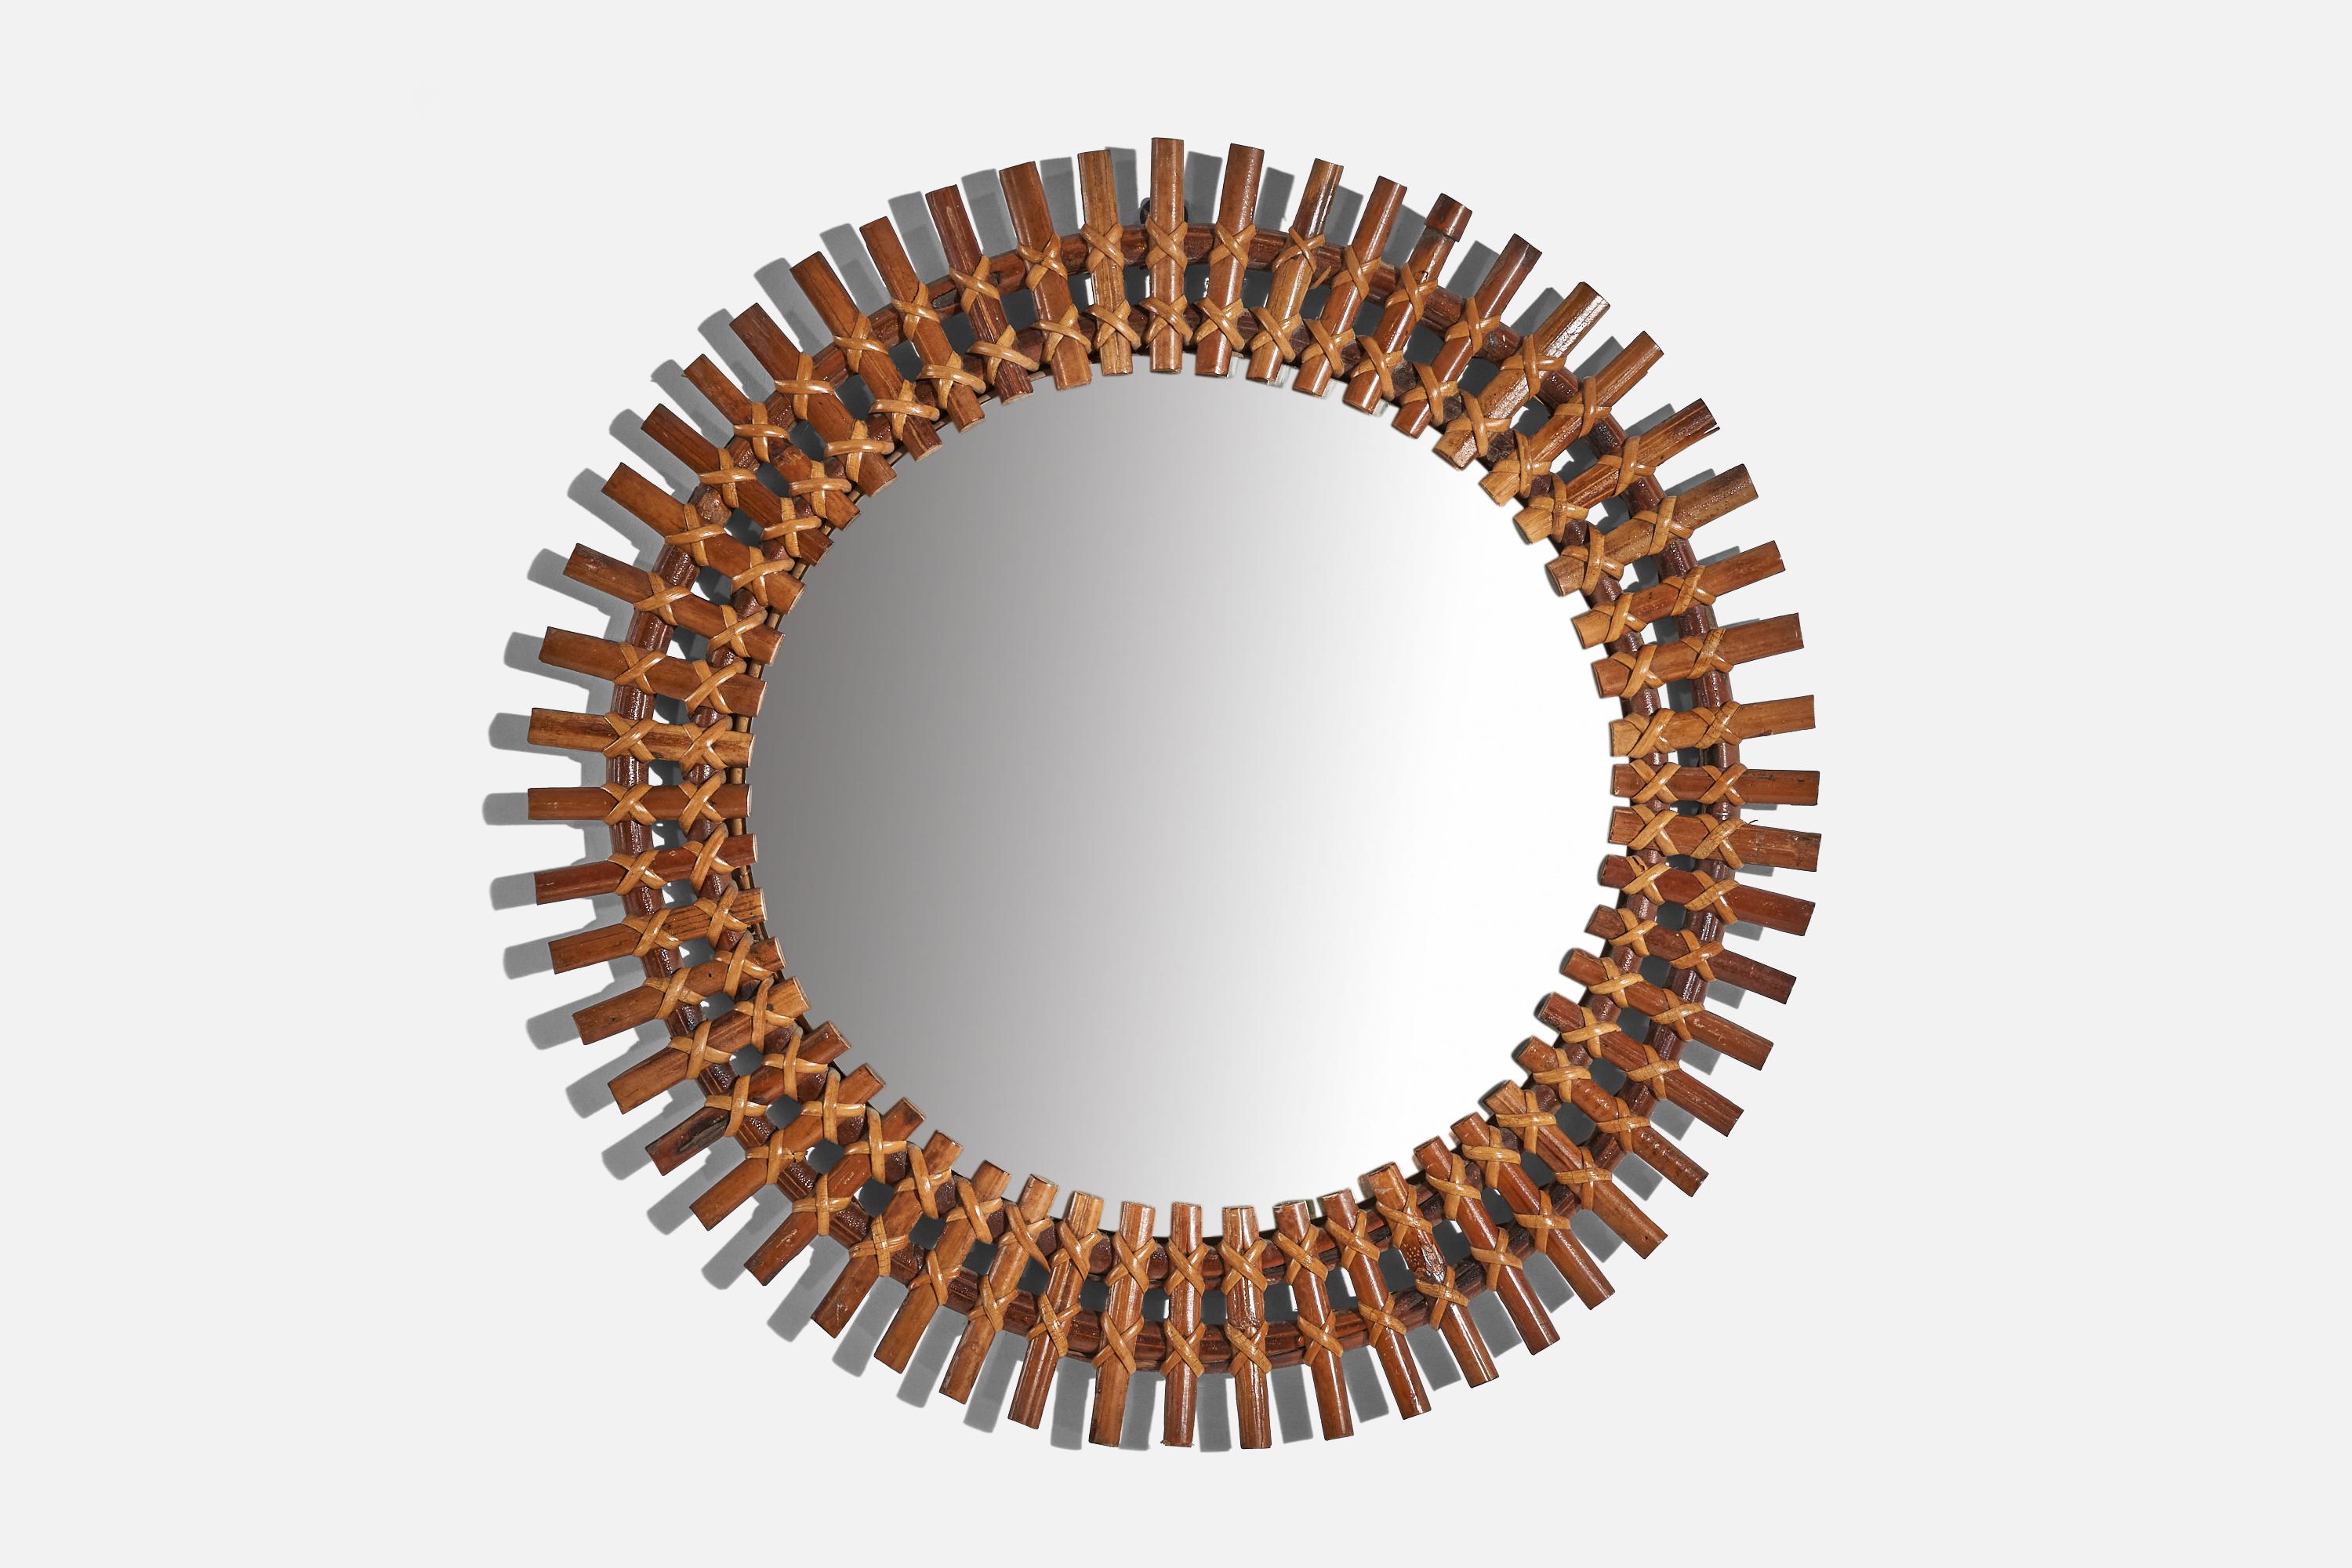 A circular, rattan wall mirror designed and produced by an Italian designer, Italy, 1950s-1960s.
   